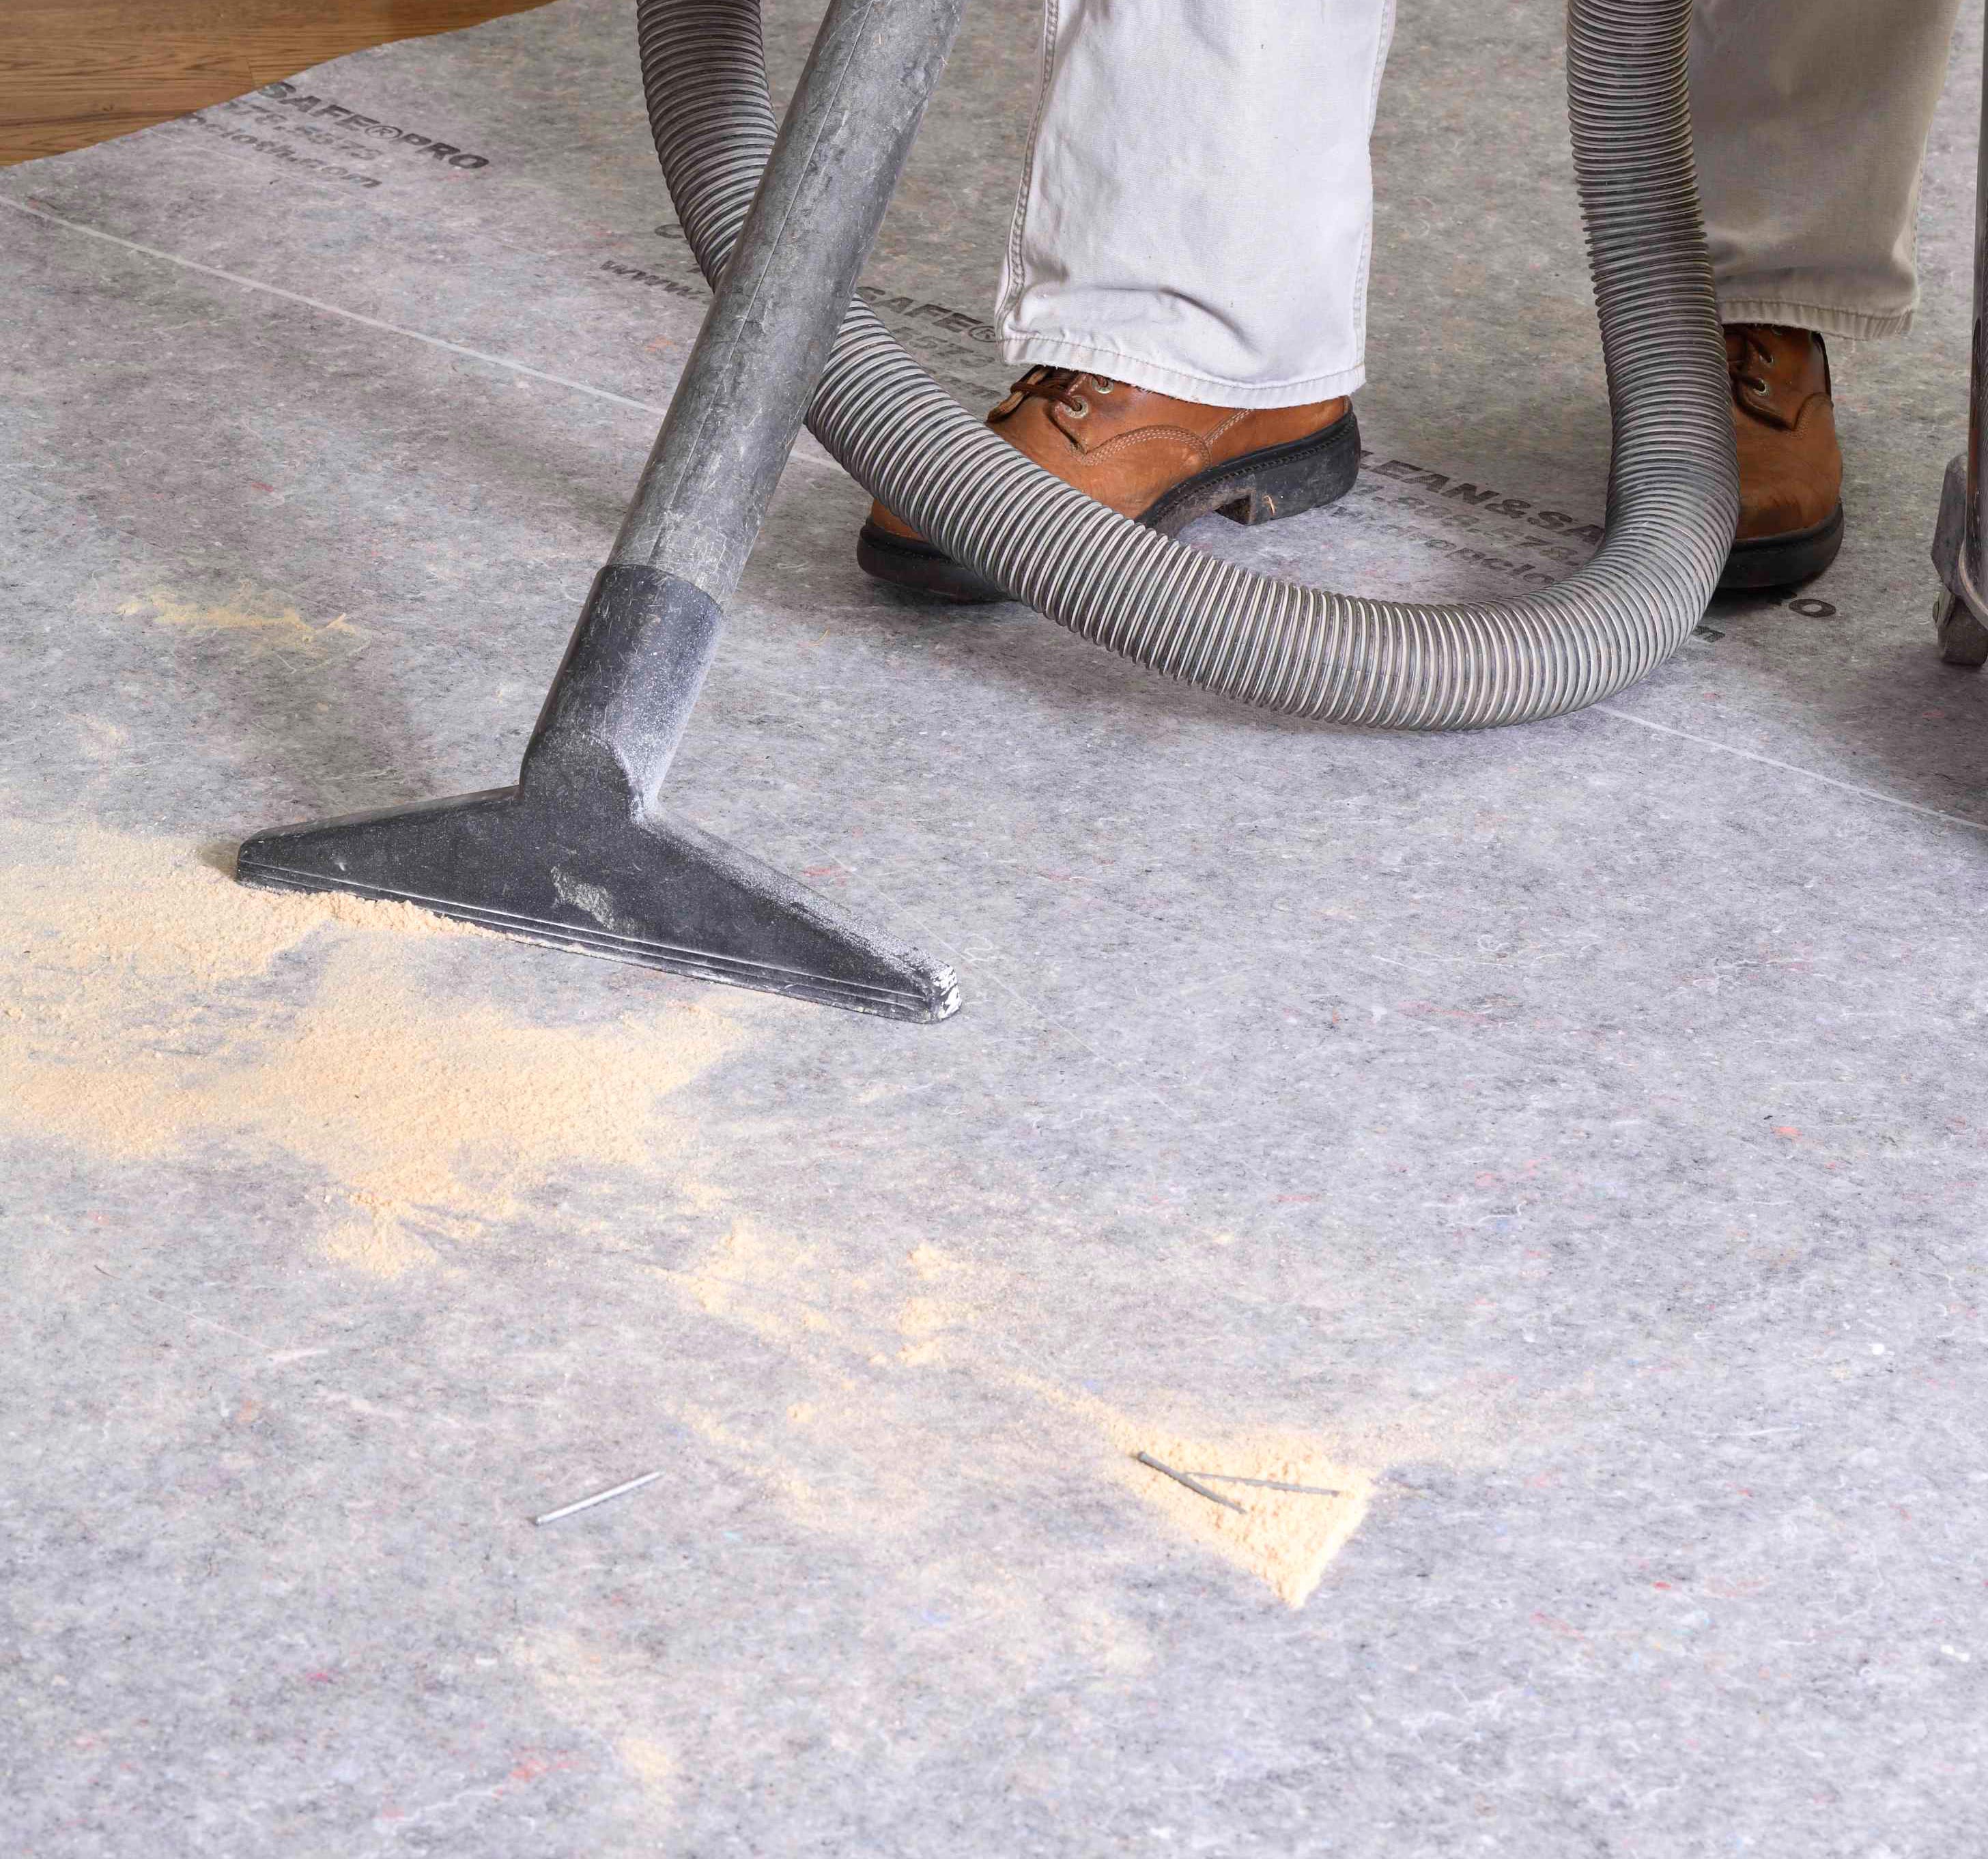 Clean&SafePro provides leak-proof protection that's easy to broom clean or vacuum.